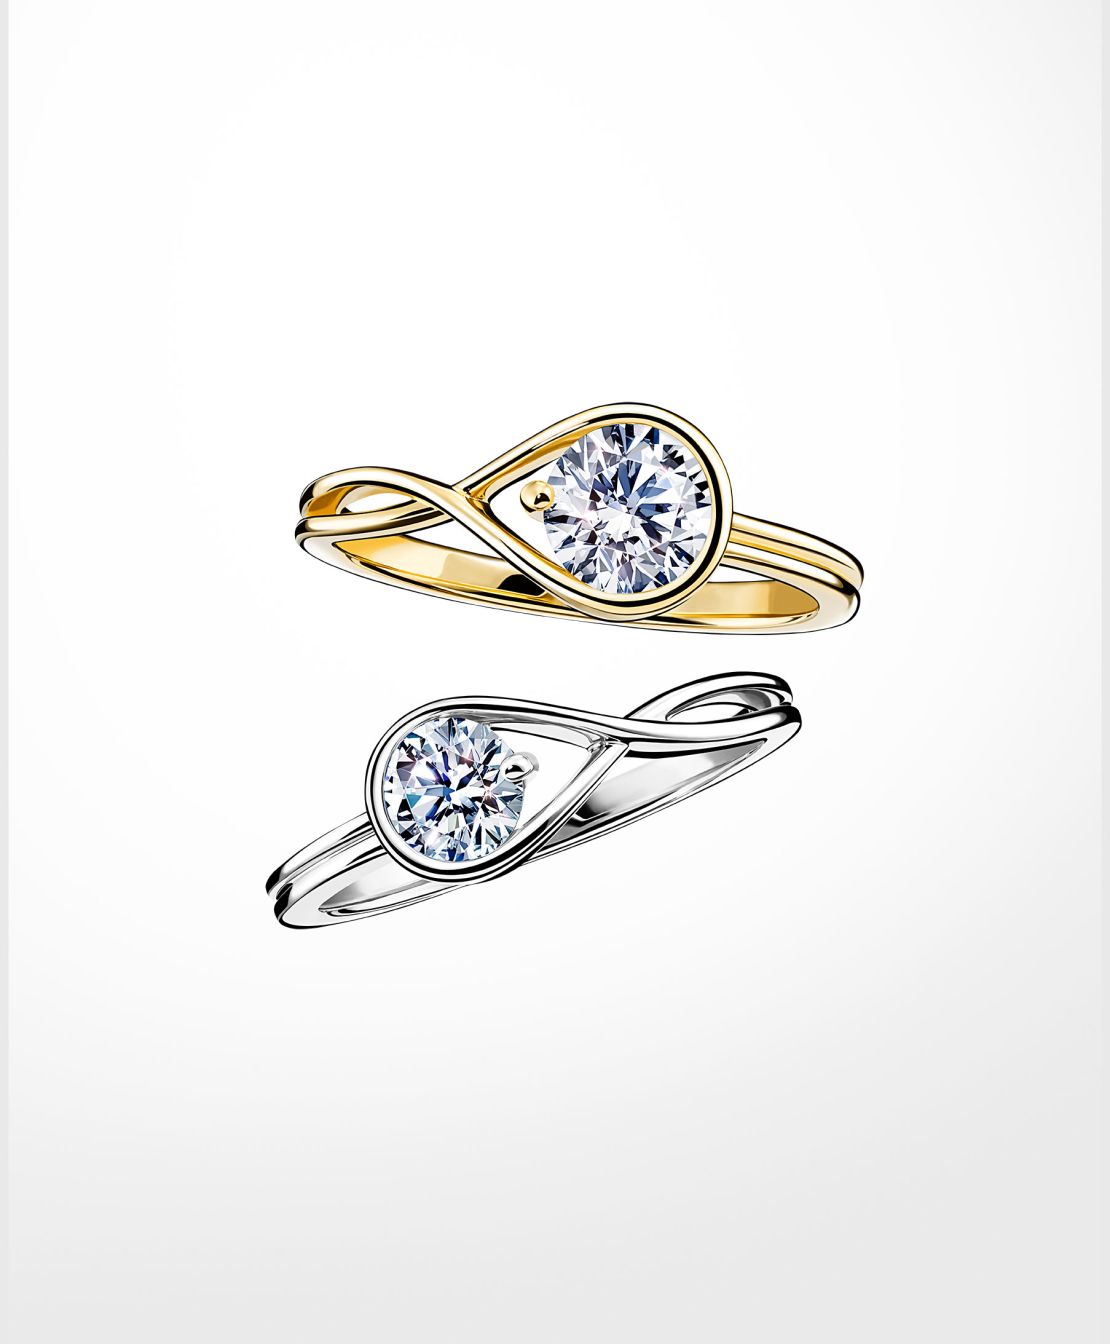 Pandora Brilliance is a new collection fthat eatures sustainably lab-created diamonds.